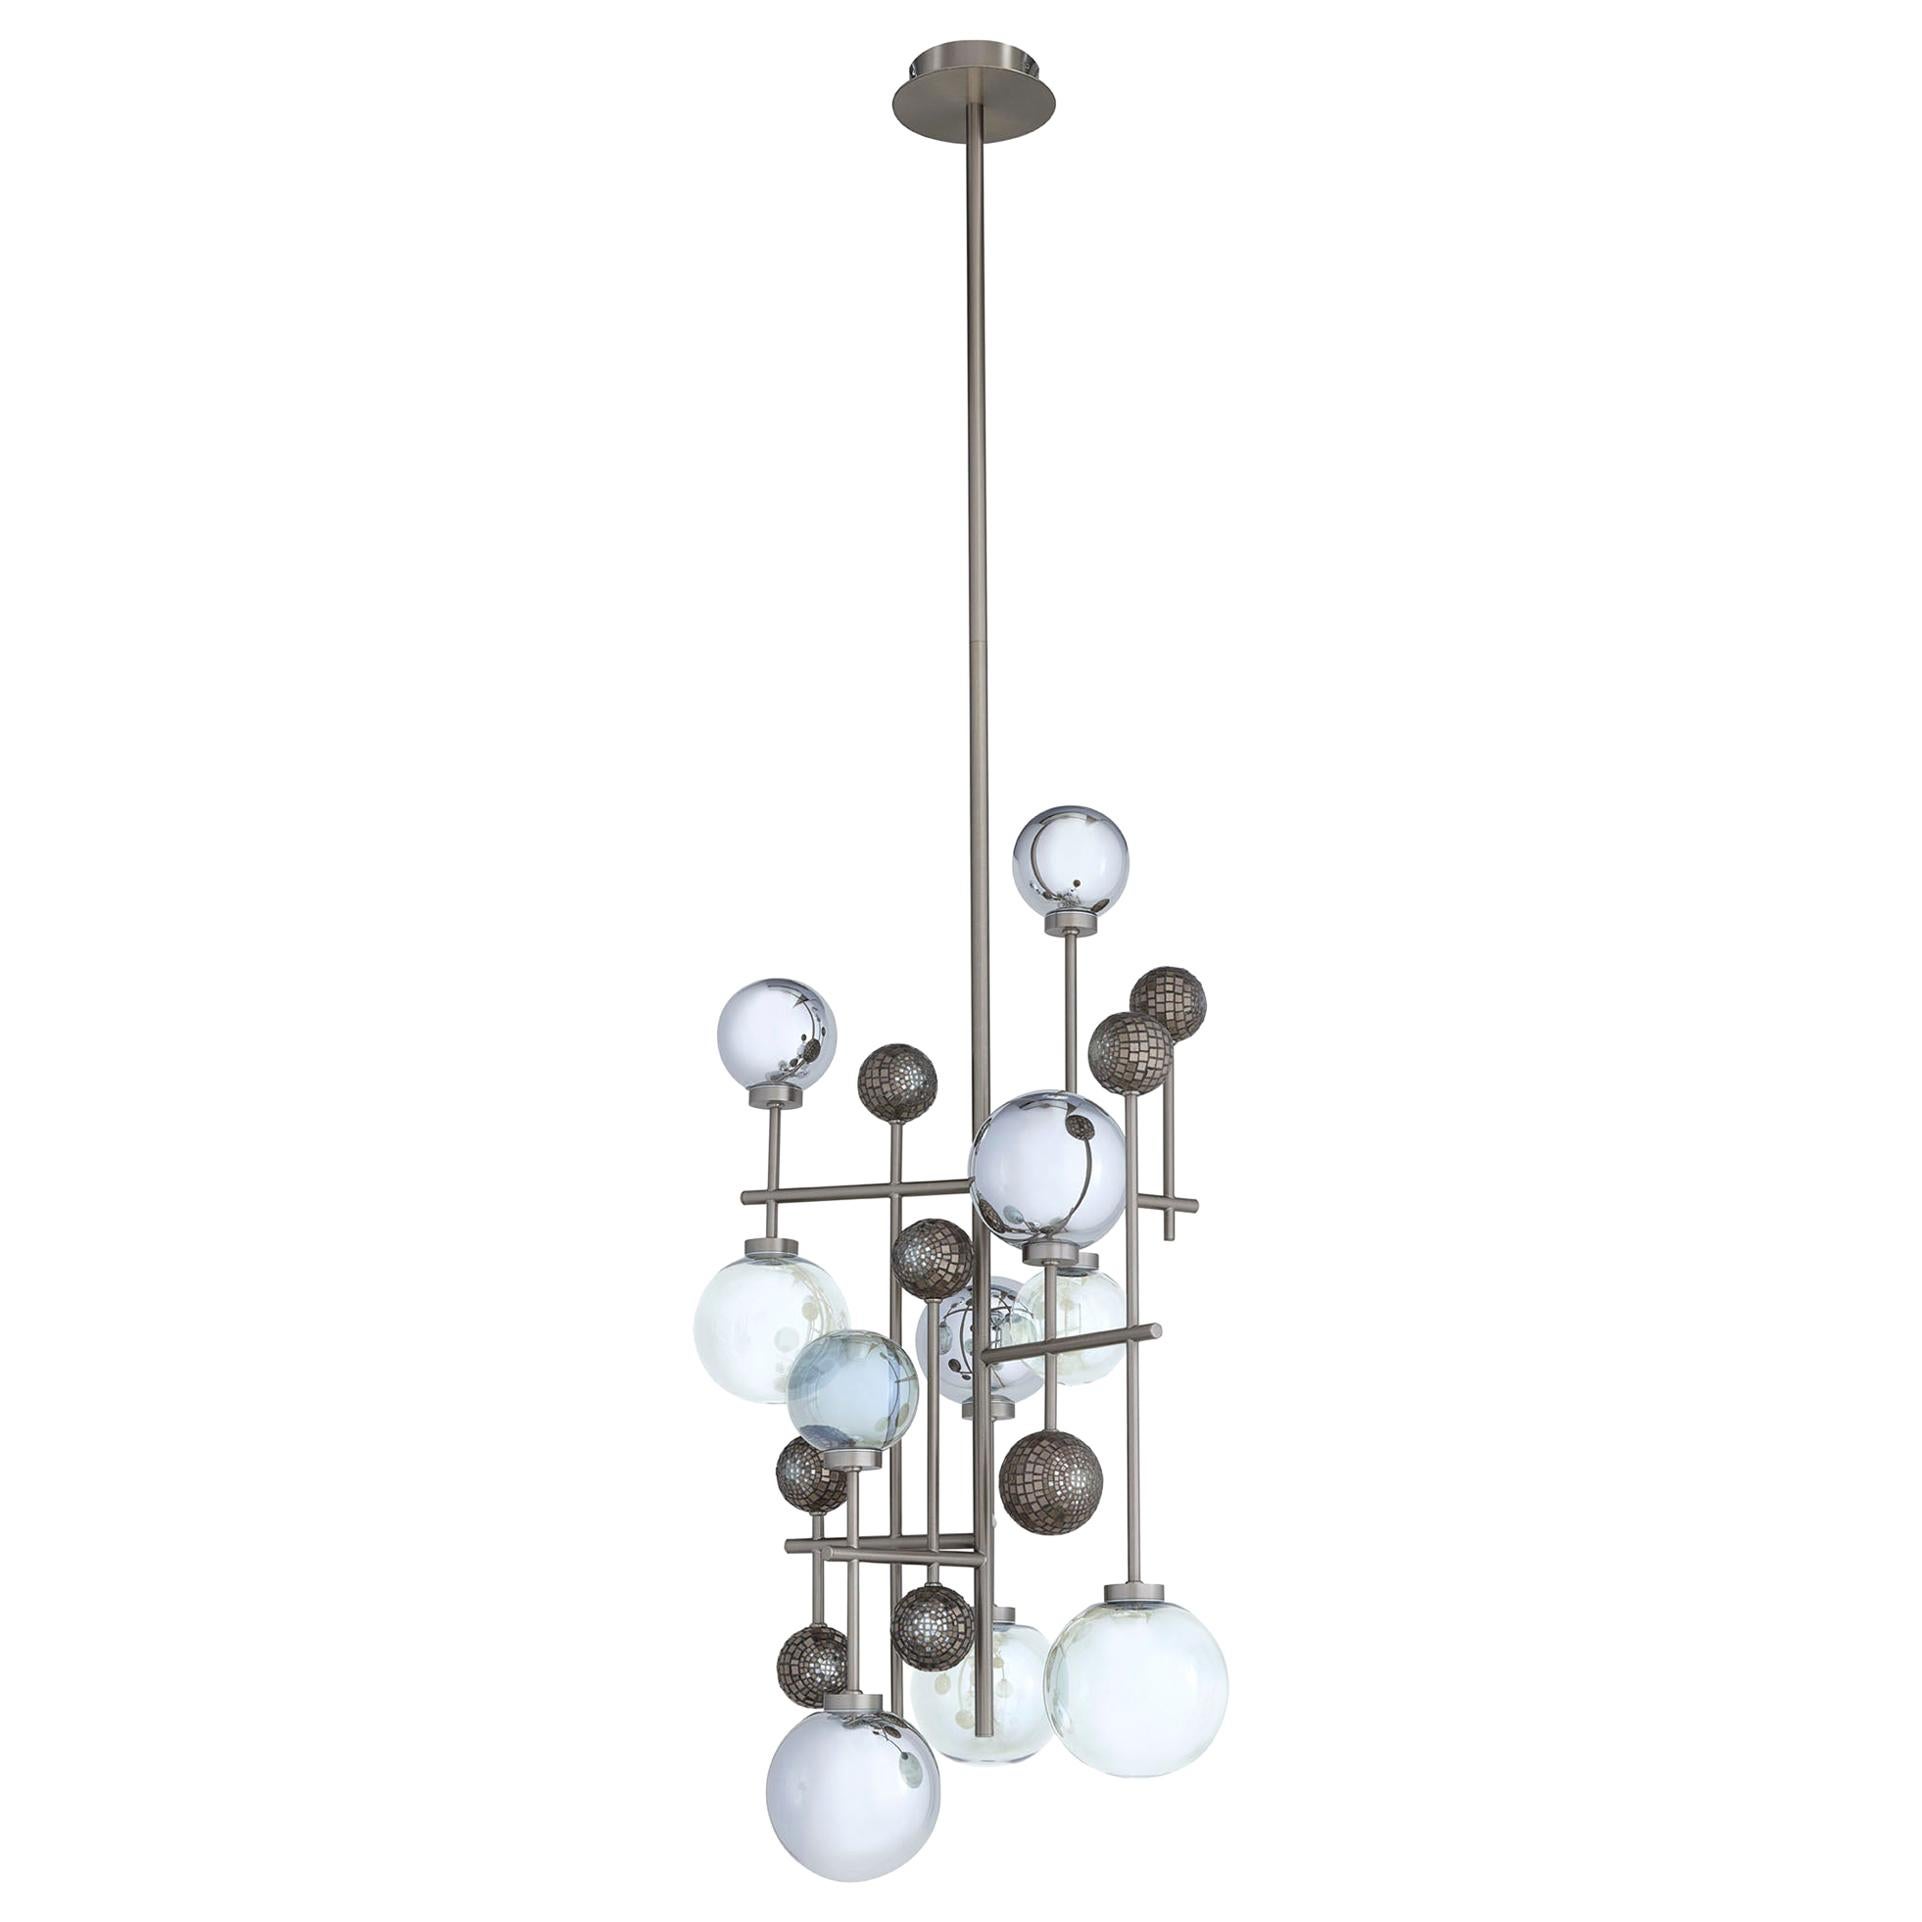 Ceiling Lamp Brass Frame Nickel or Brass Finish Glass Spheres Artistic Mosaic For Sale